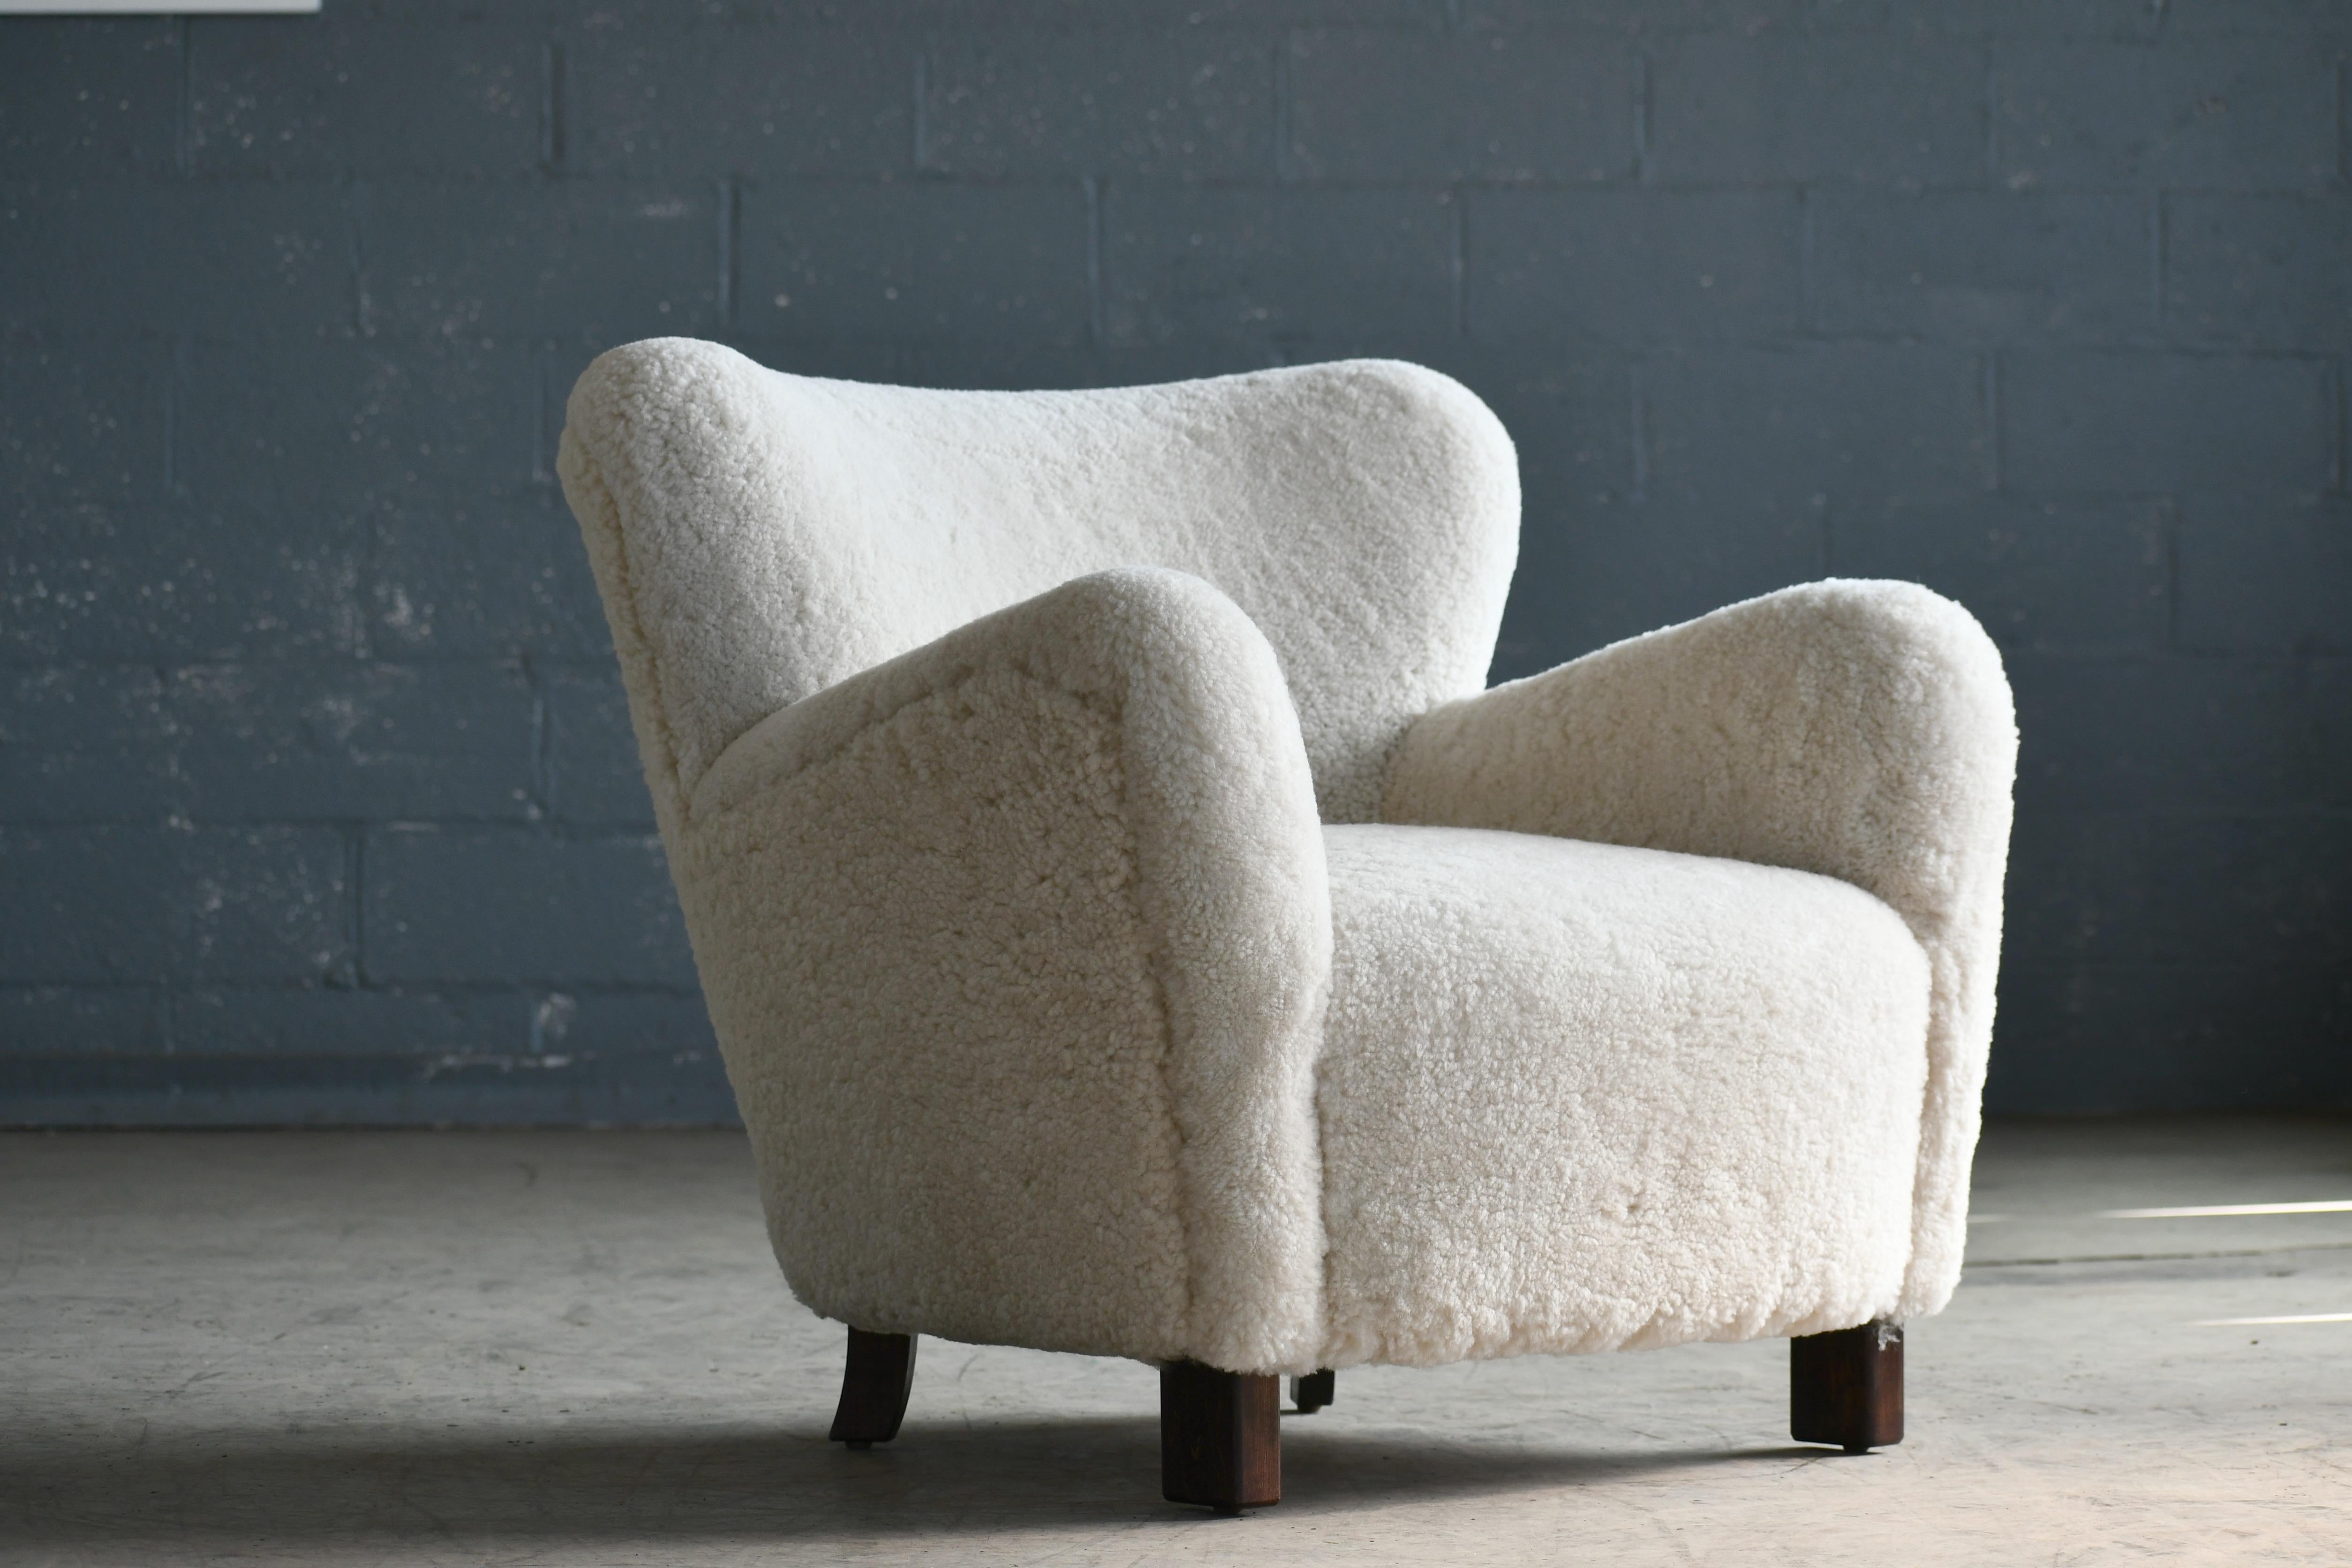 American Pair of 1940s Style Classic Club or Lounge Chairs in Shearling